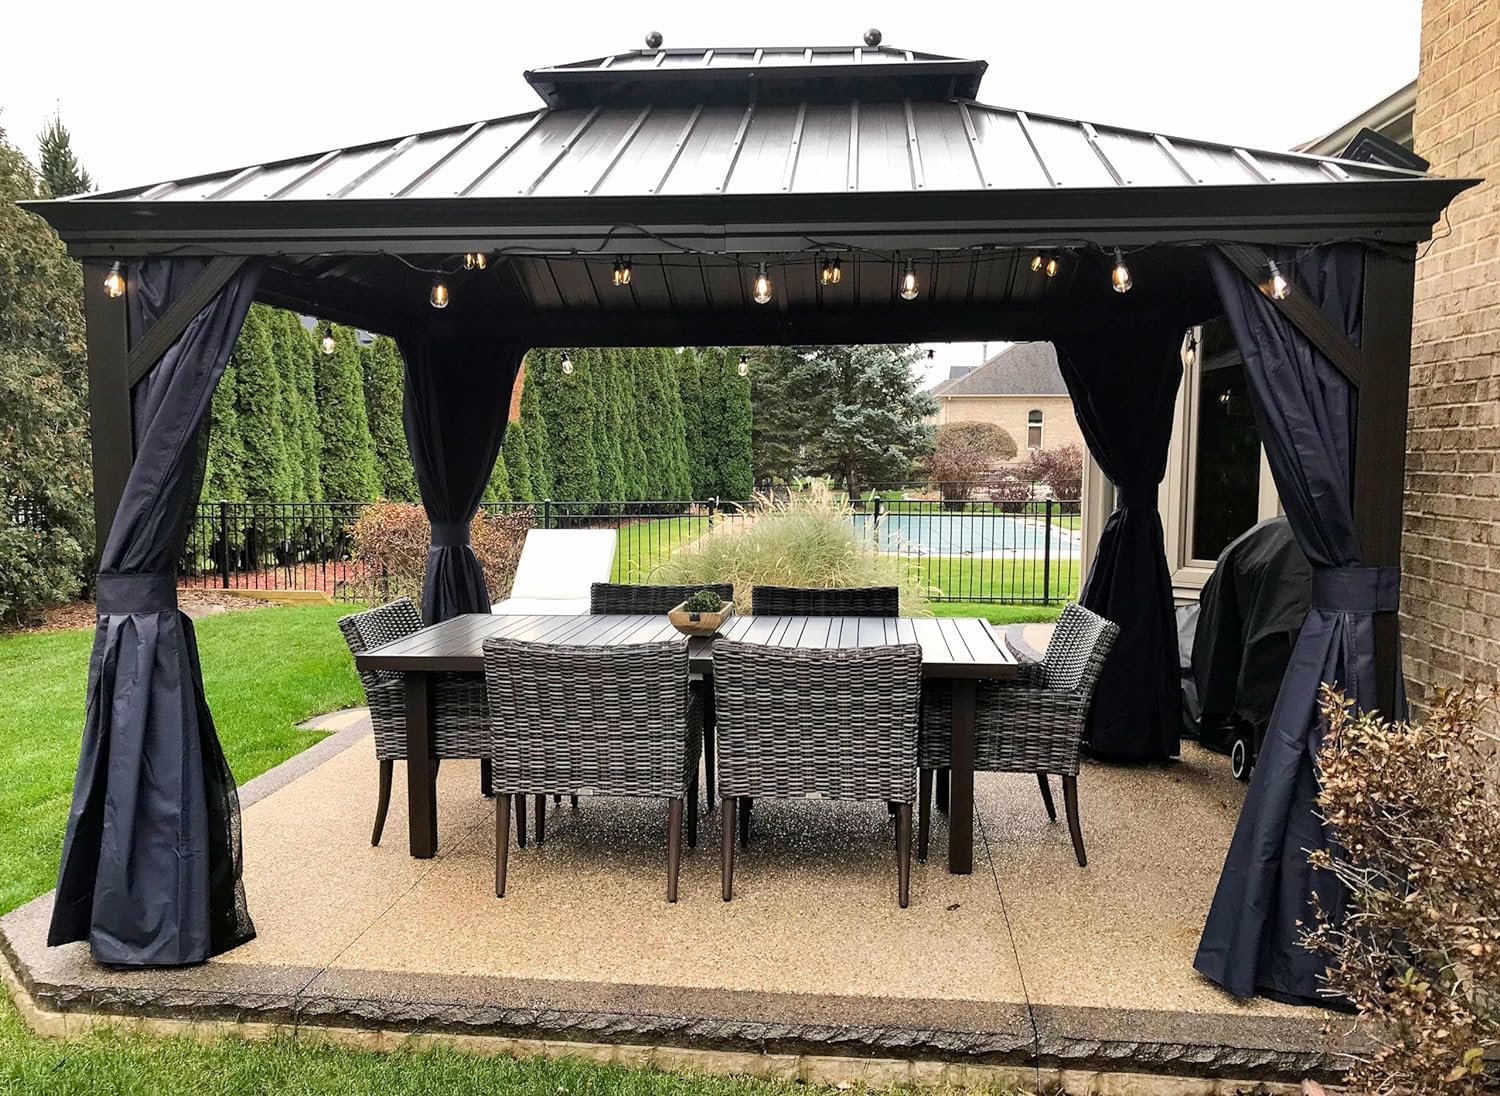 PURPLE LEAF 10' X 12' Hardtop Gazebo Canopy with Netting and Curtains for Outdoor Deck Backyard Heavy Duty Sunshade Outside Metal Patio Permanent Pavilion